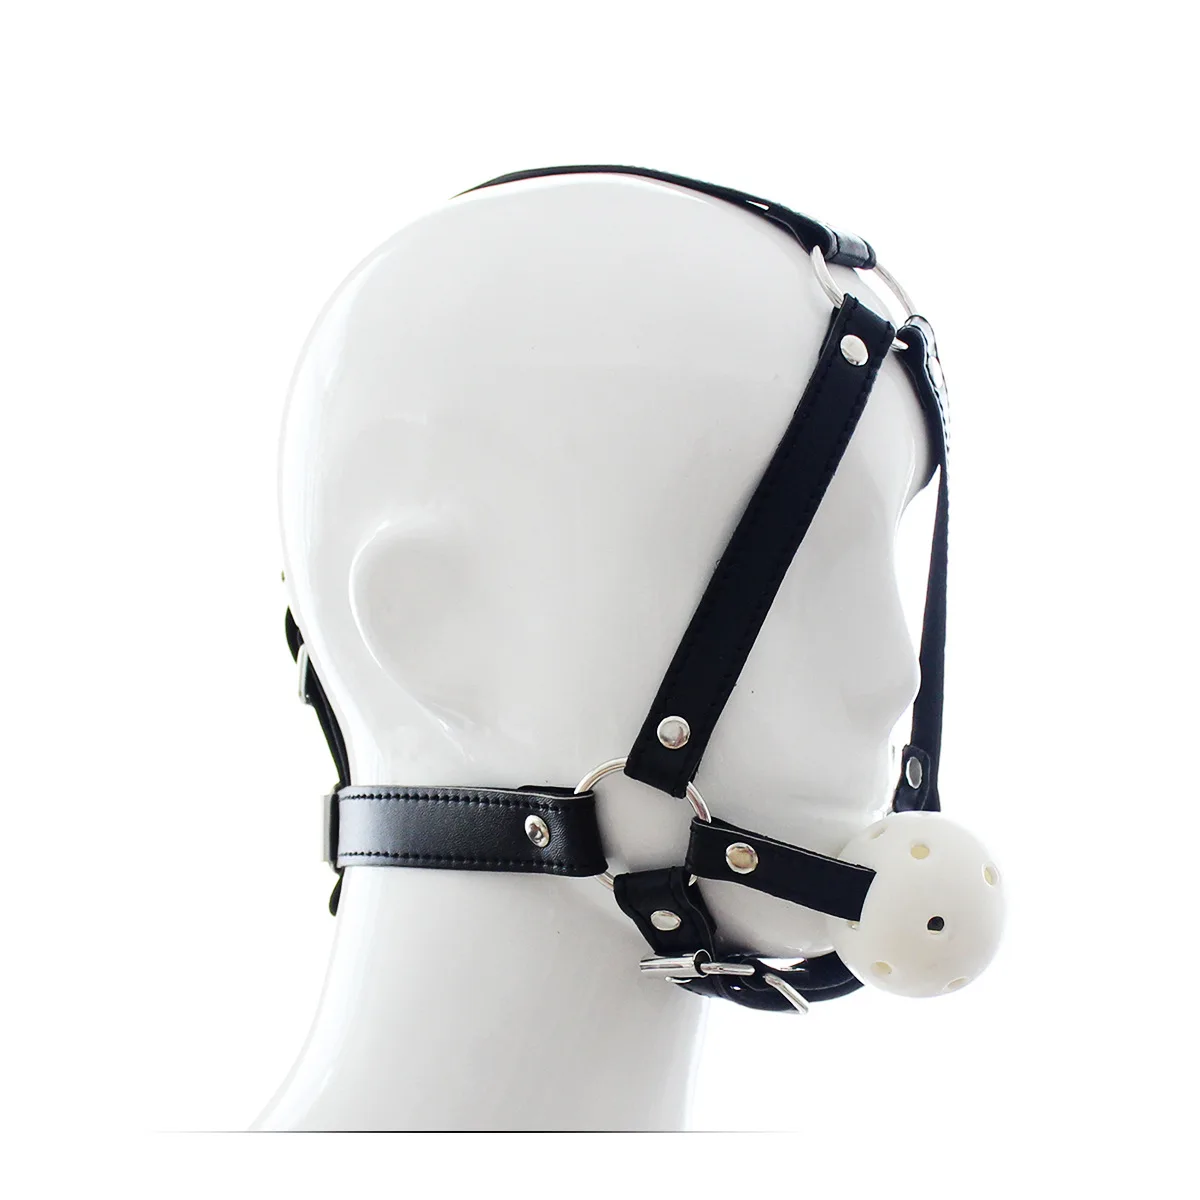 Adjustable SM Mouth Ball Gag For Bondage Restraint PU Leather Toy Adult  Games #R410 From Zgmtai, $23.13